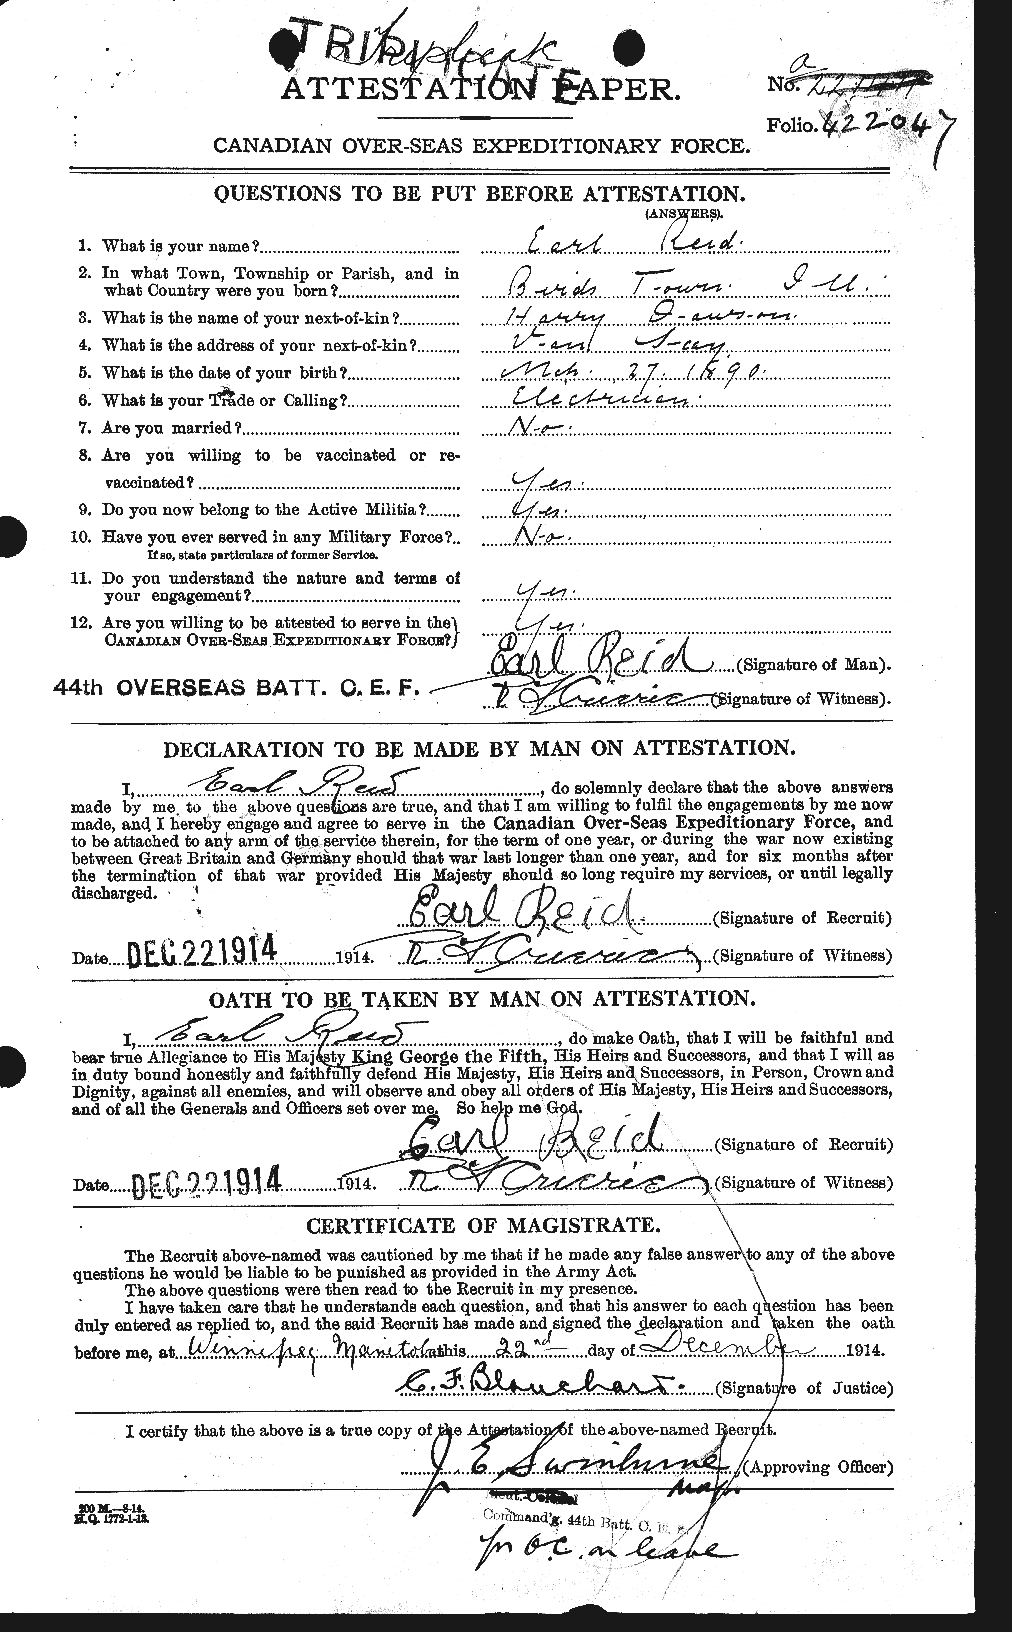 Personnel Records of the First World War - CEF 597973a